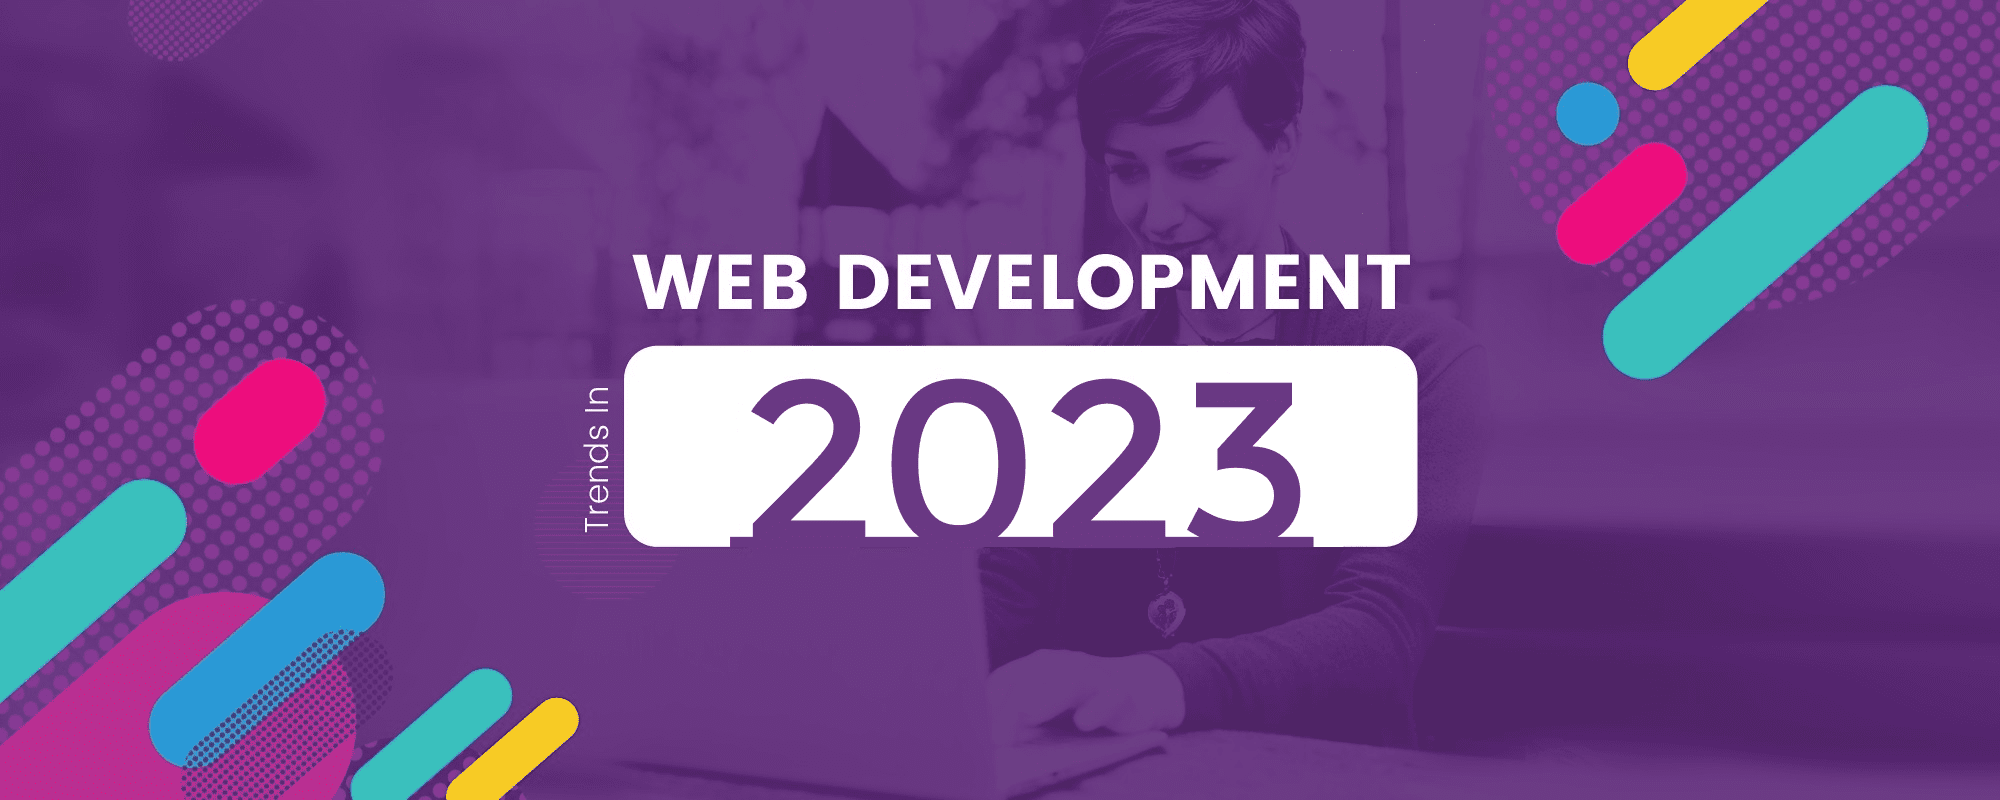 15 Web Design & Development Trends To Watch Out For In 2023